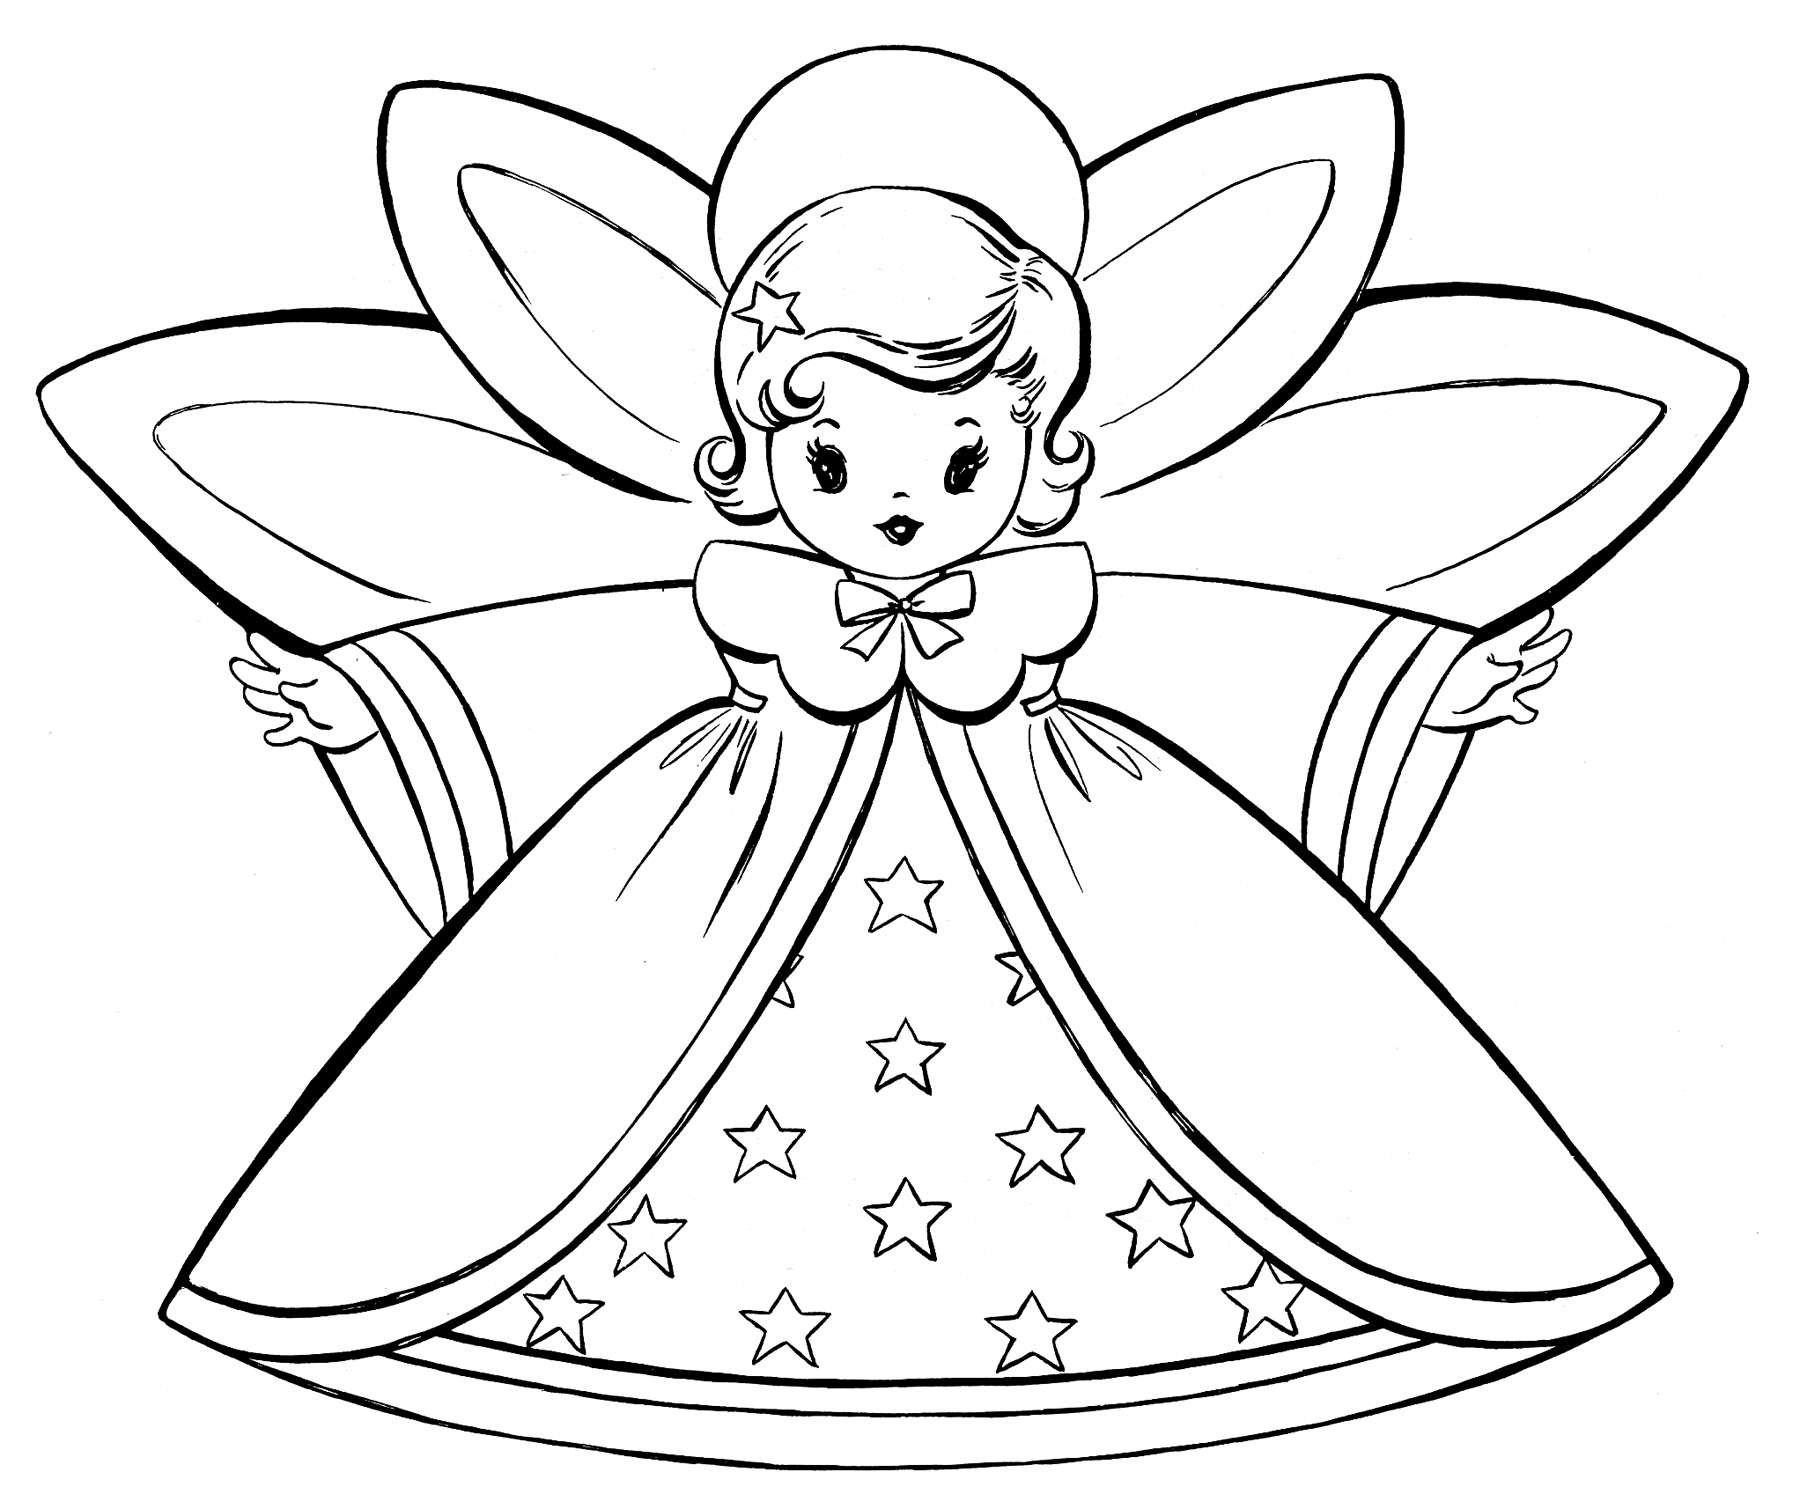 Free Christmas Printable Coloring Pages Free Christmas Coloring Pages Retro Angels The Graphics Fairy